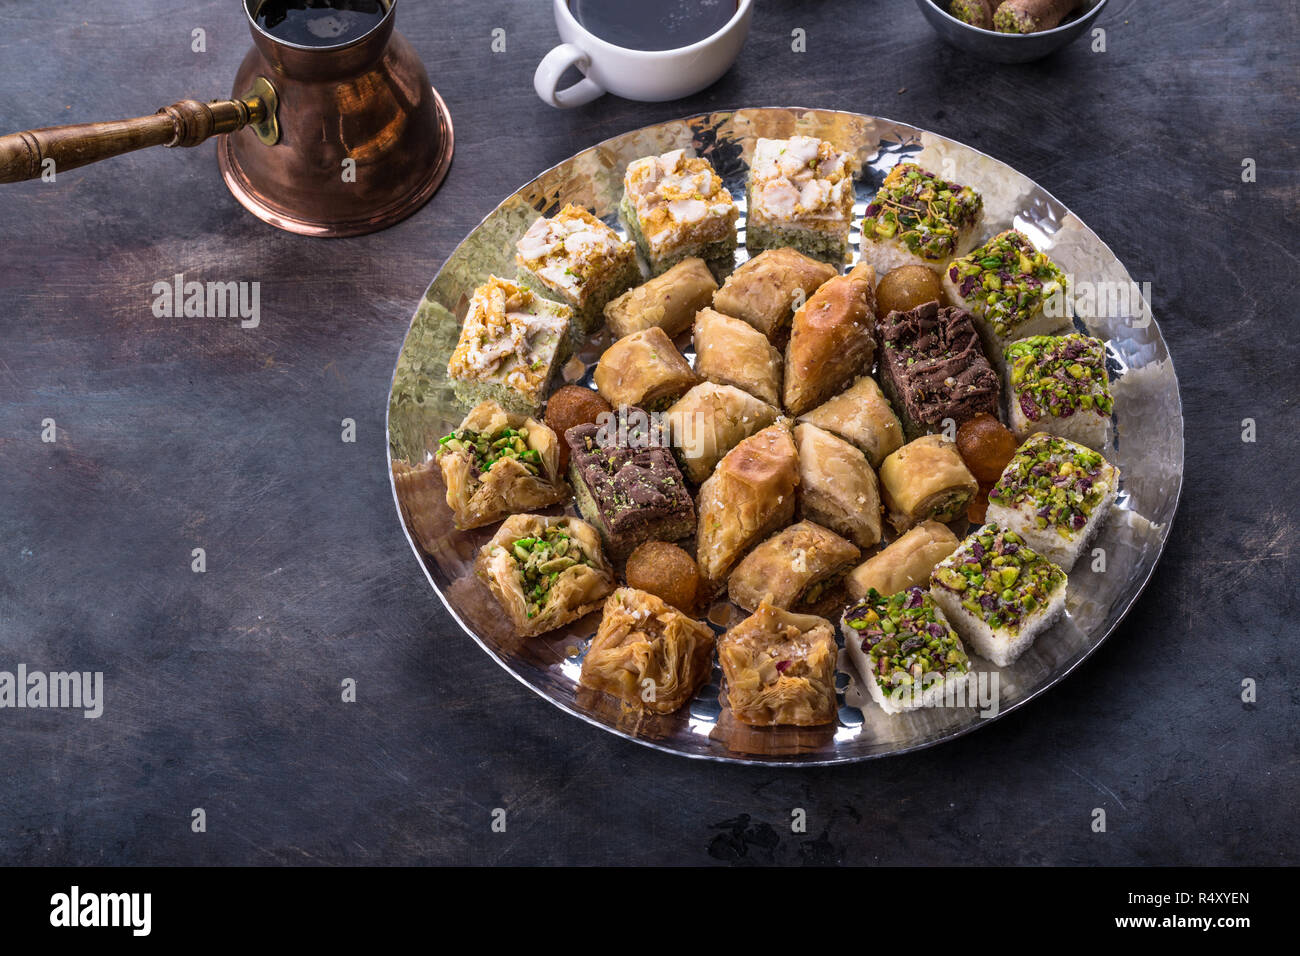 Arabic Sweets High Resolution Stock Photography and Images - Alamy